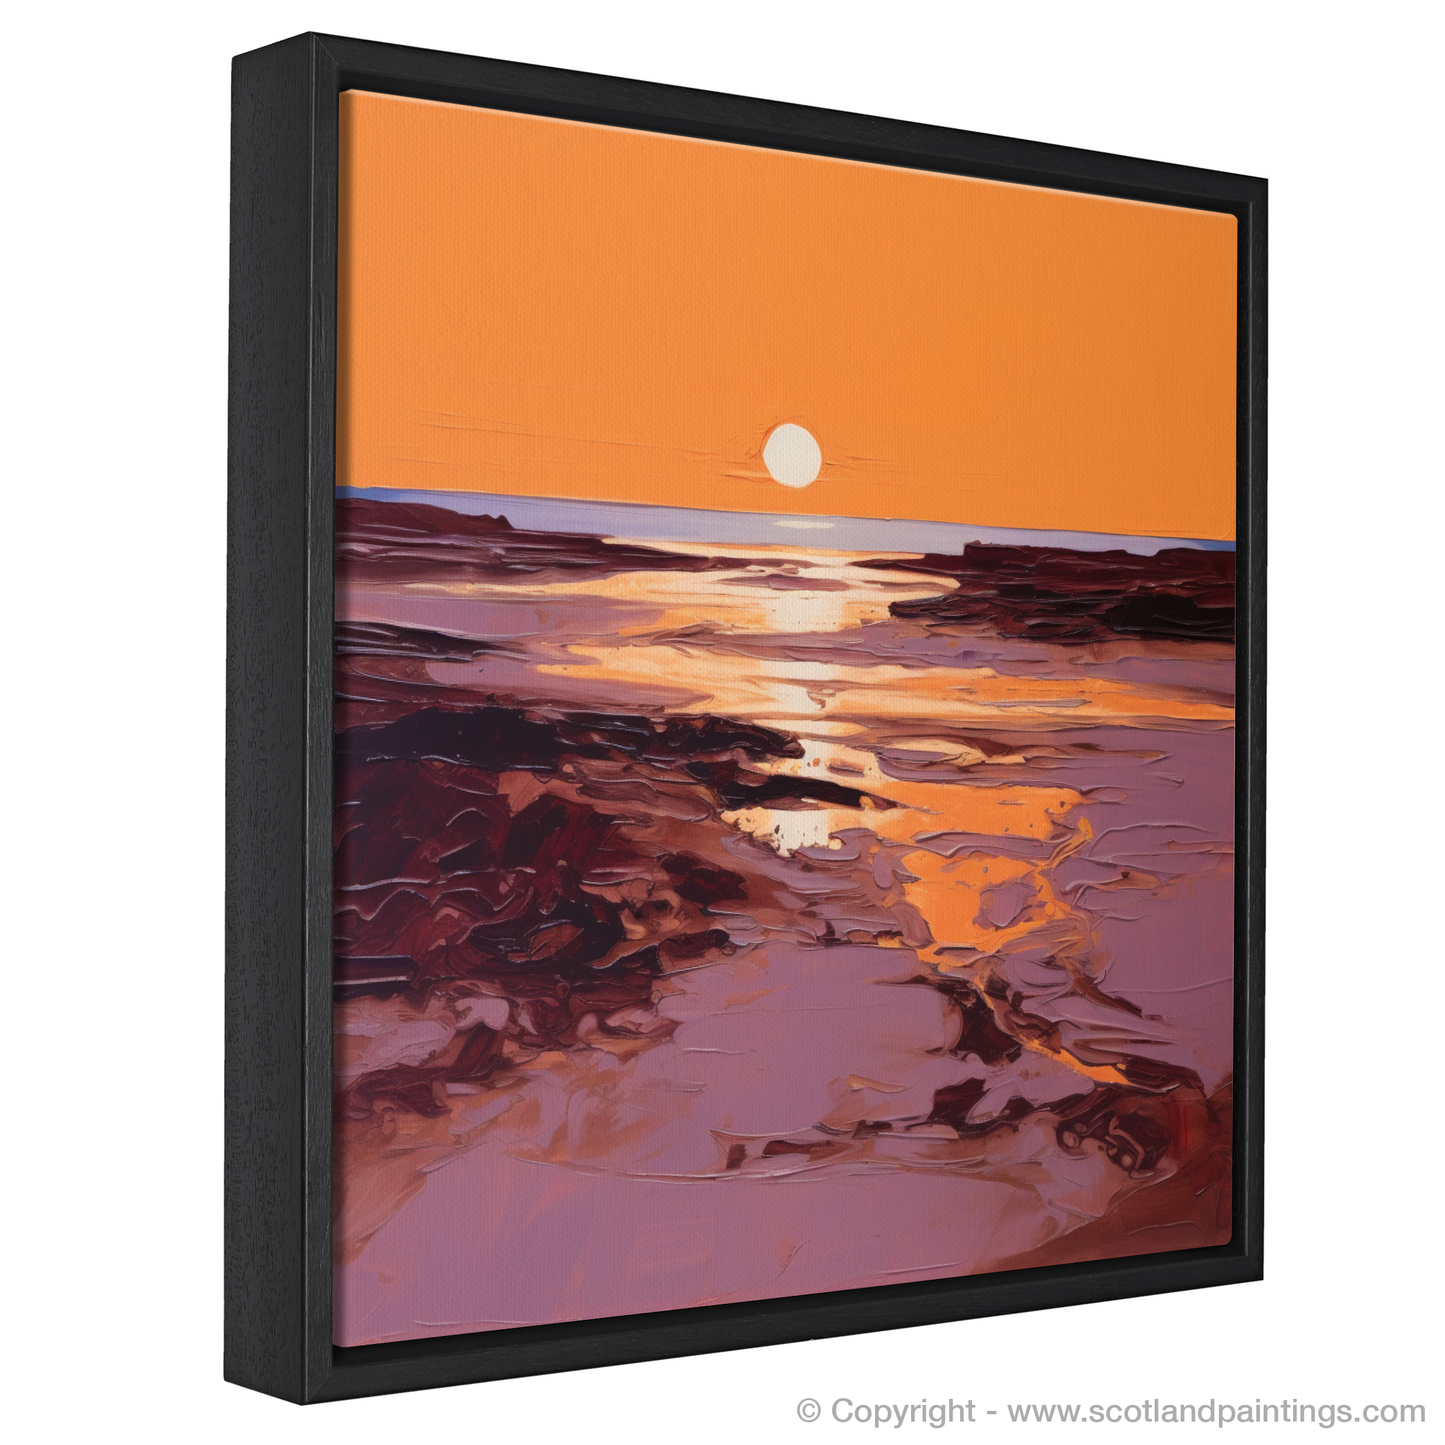 Painting and Art Print of Balmedie Beach at golden hour entitled "Golden Hour Embrace at Balmedie Beach".